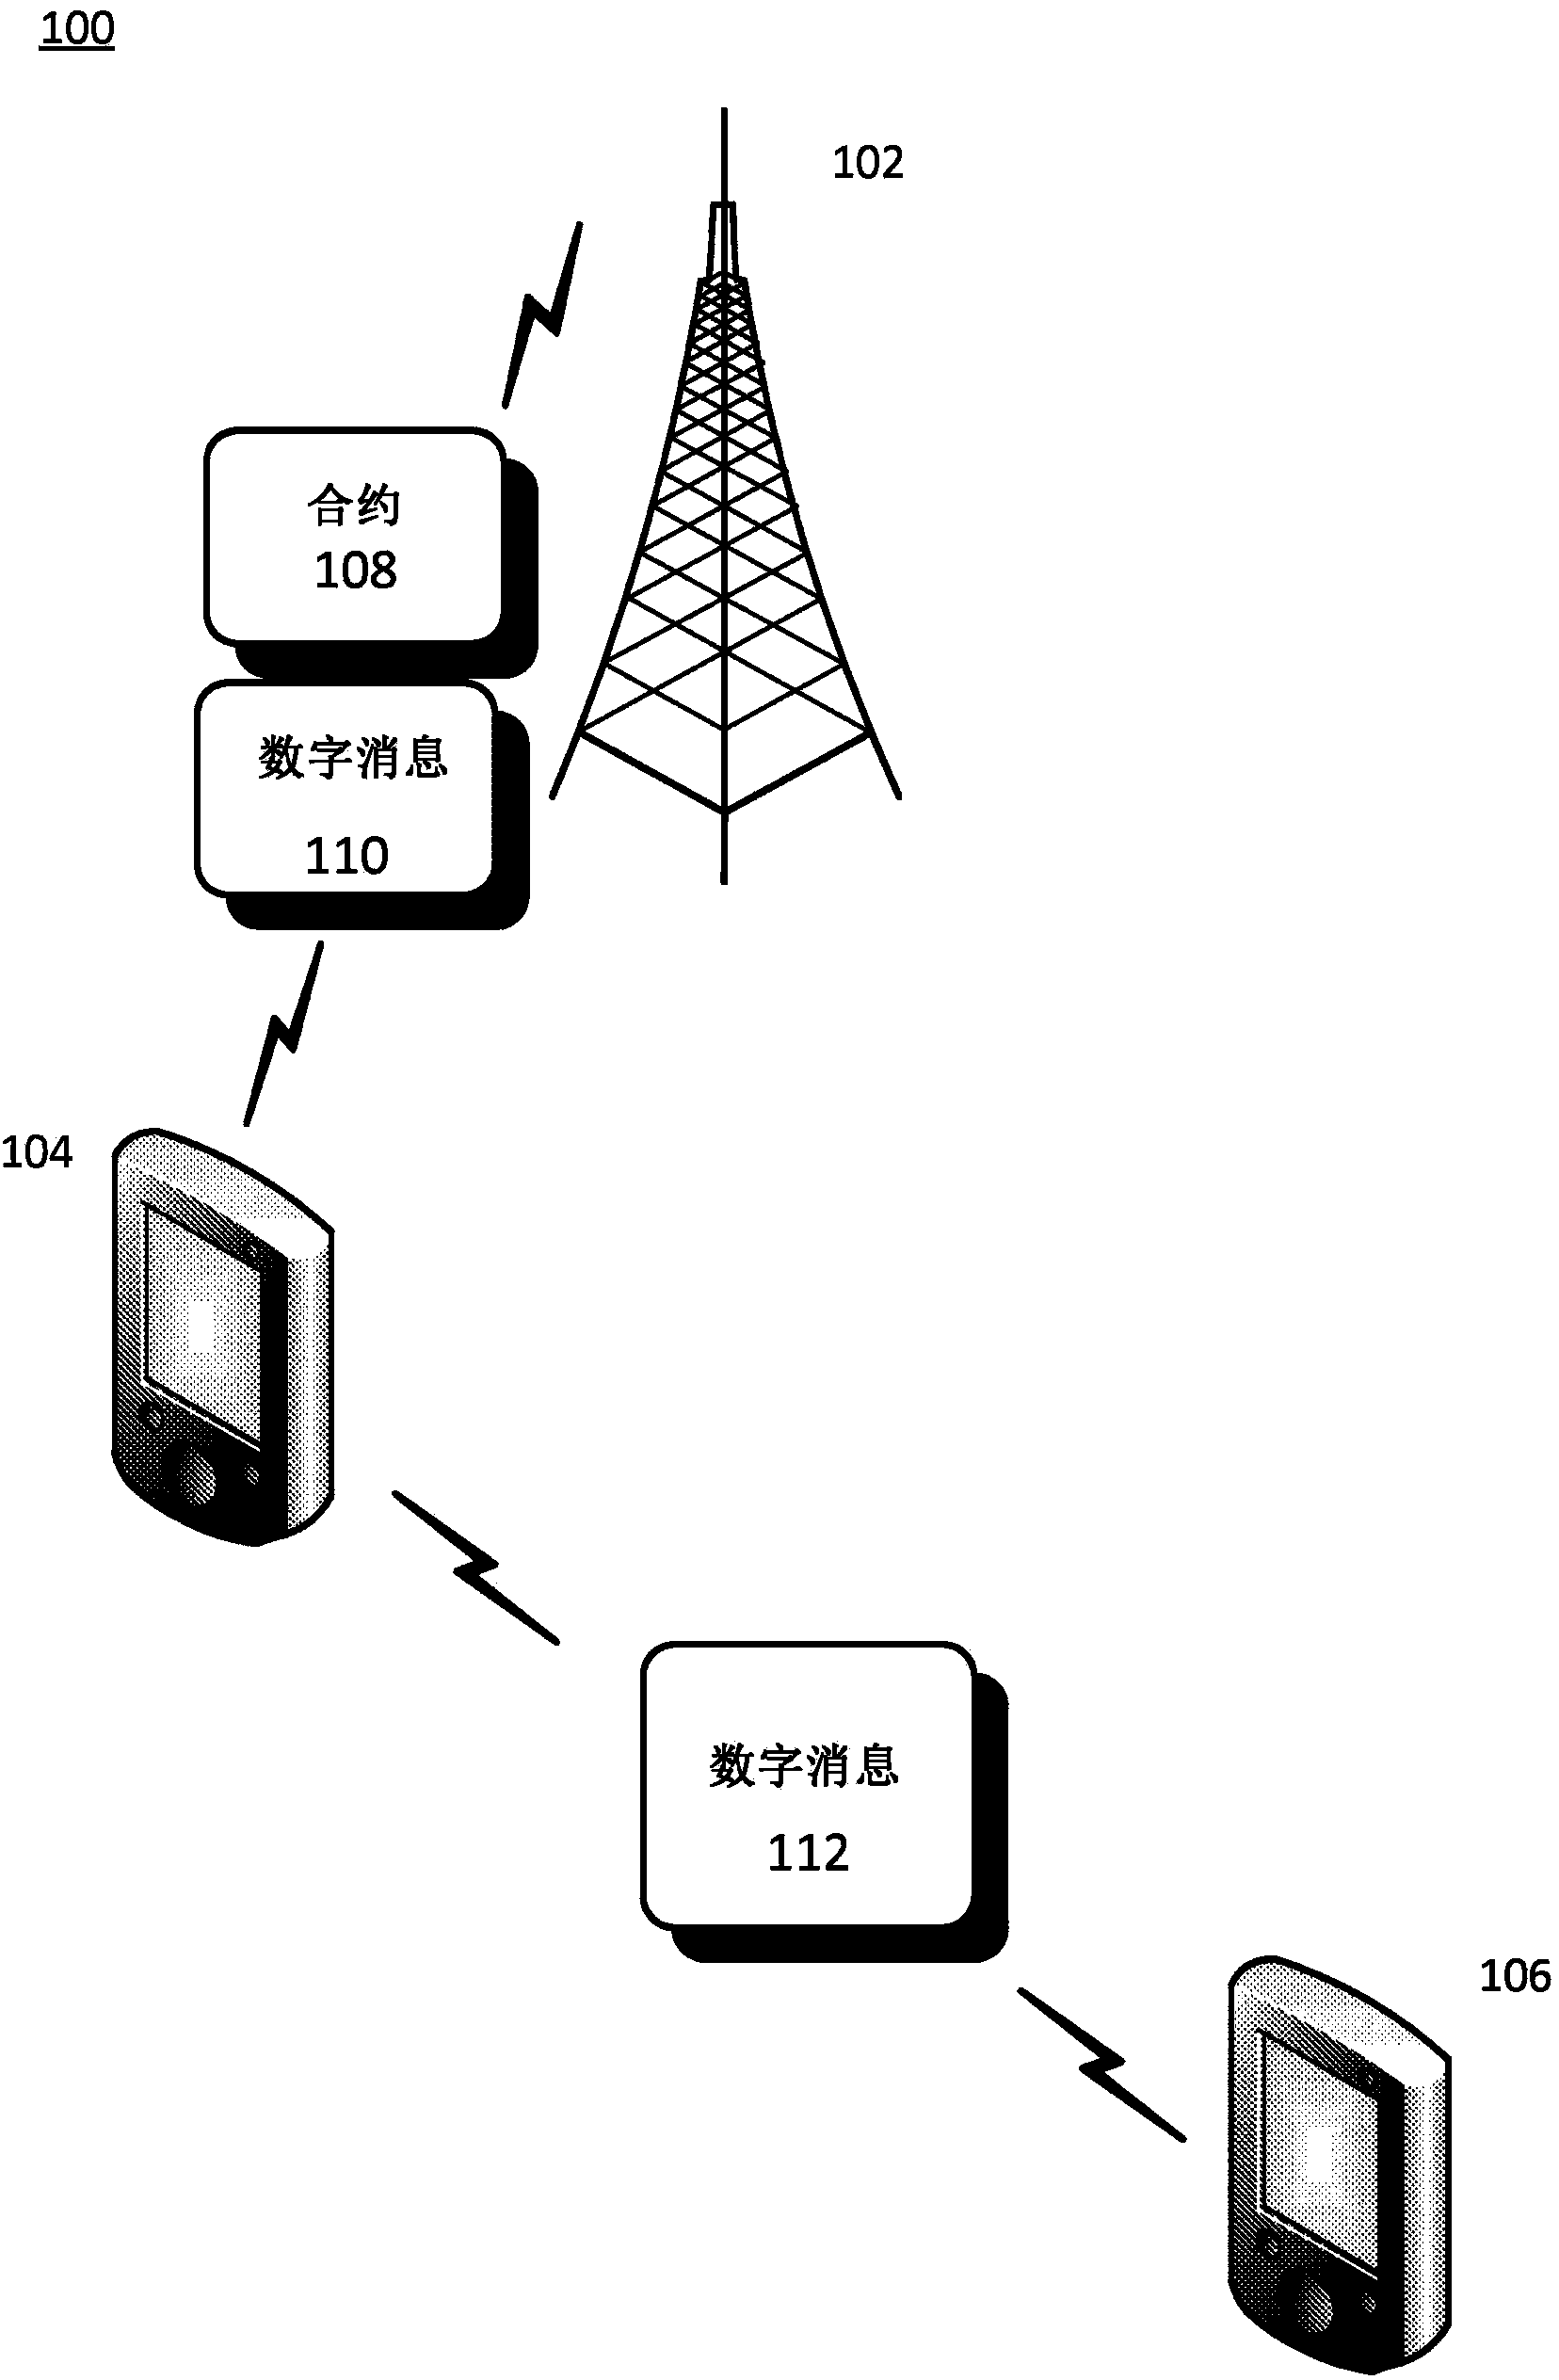 Digital relay for output of network devices